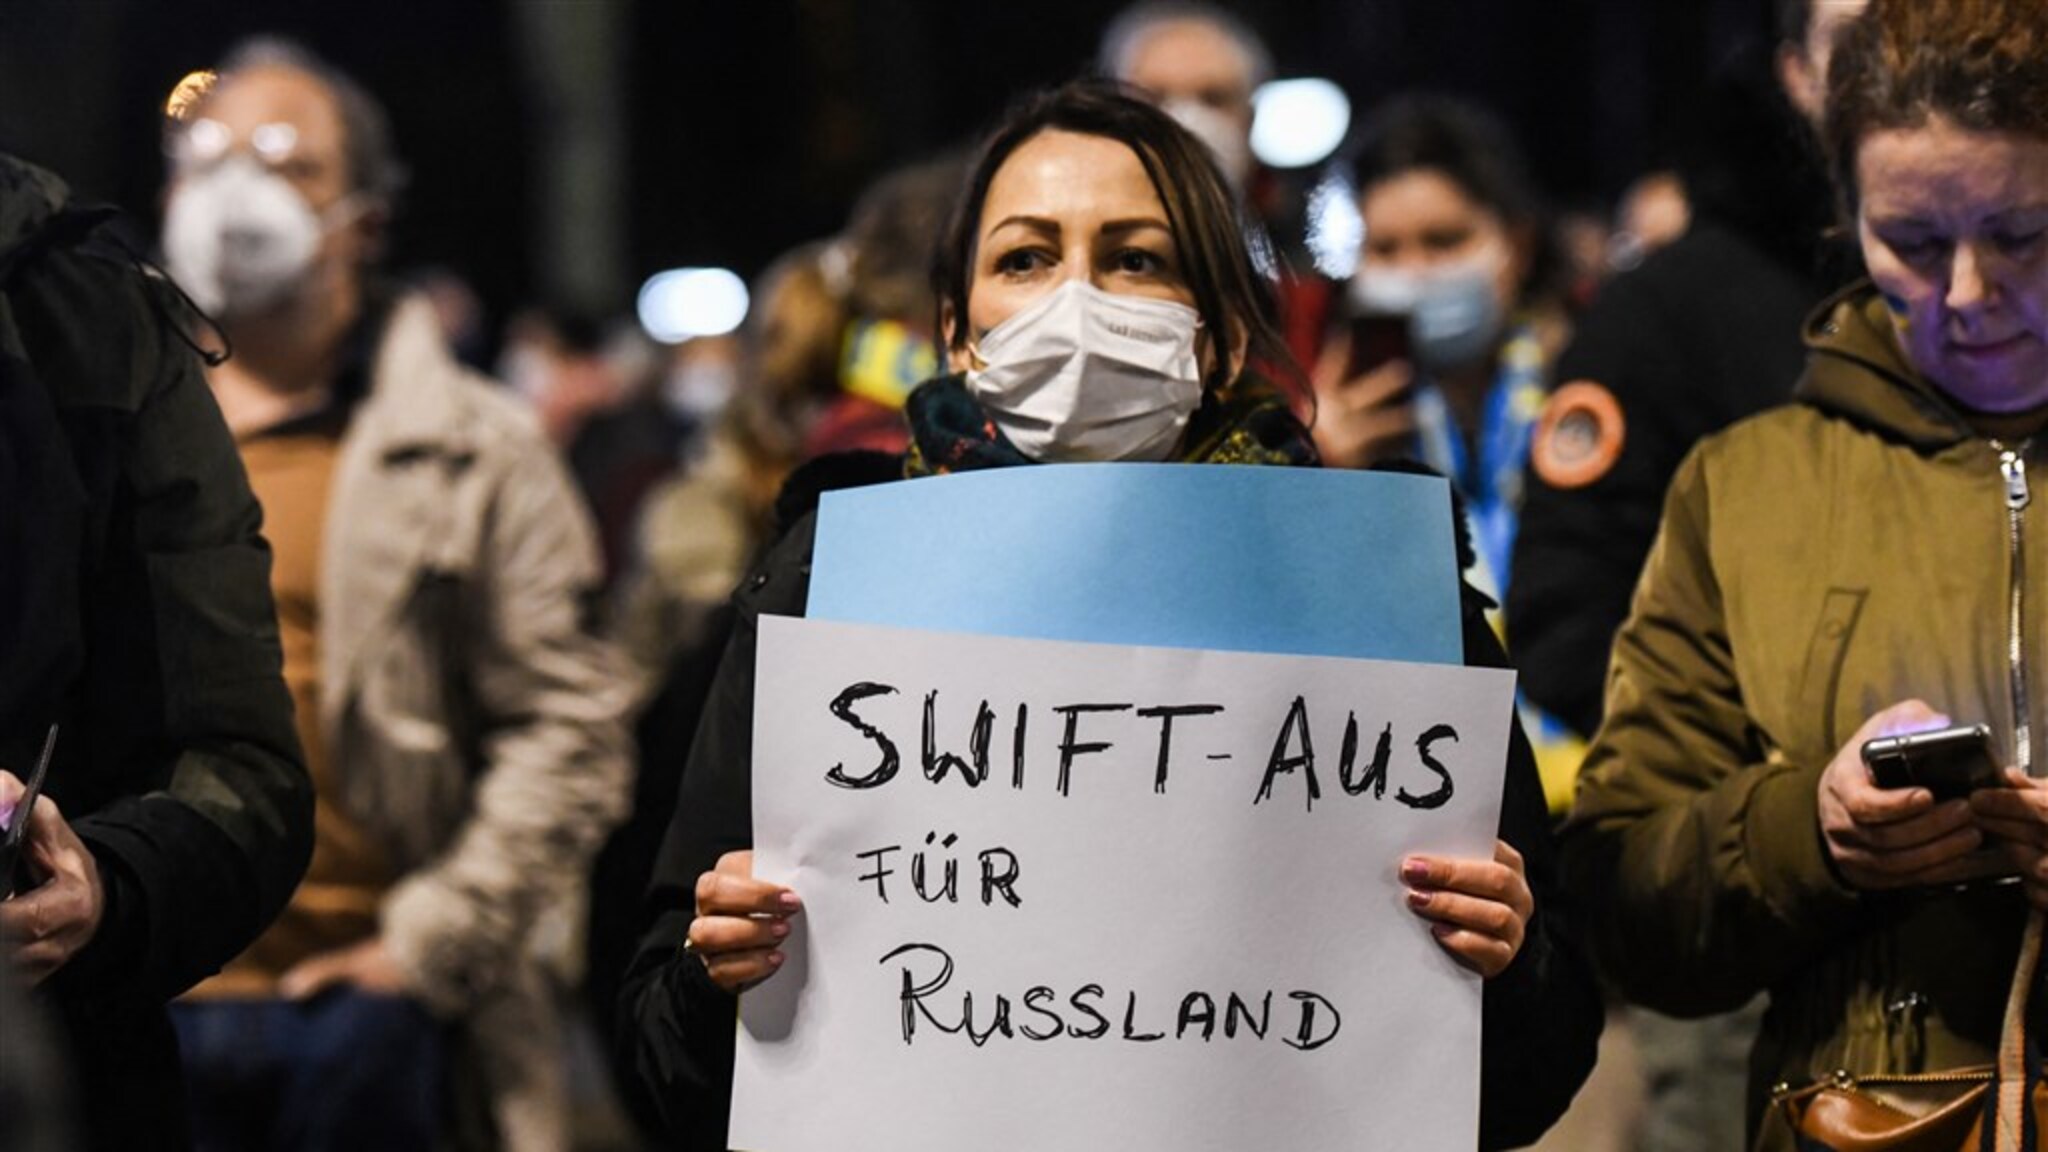 Exclude Russia from the SWIFT system or not?  Germany is under pressure